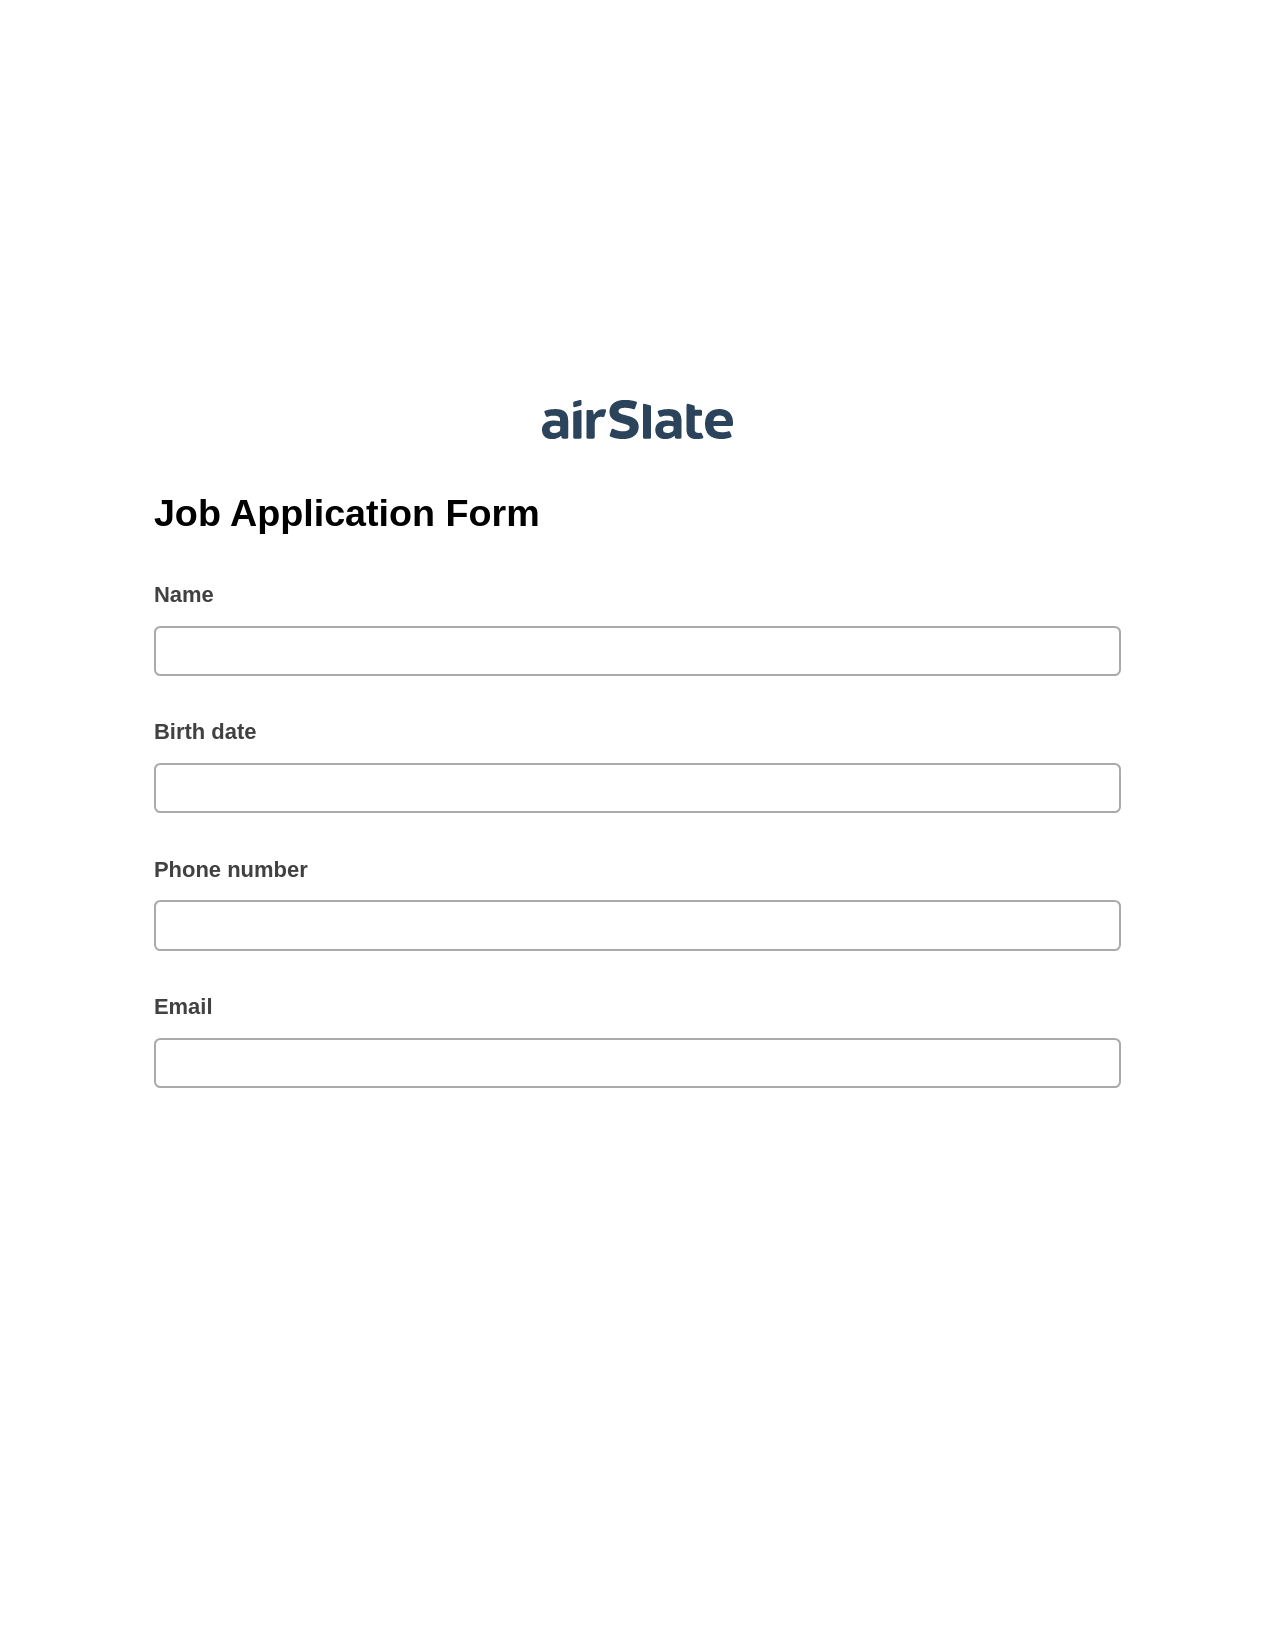 Job Application Form Pre-fill Dropdown from Airtable, Send a Slate to Salesforce Contact Bot, OneDrive Bot